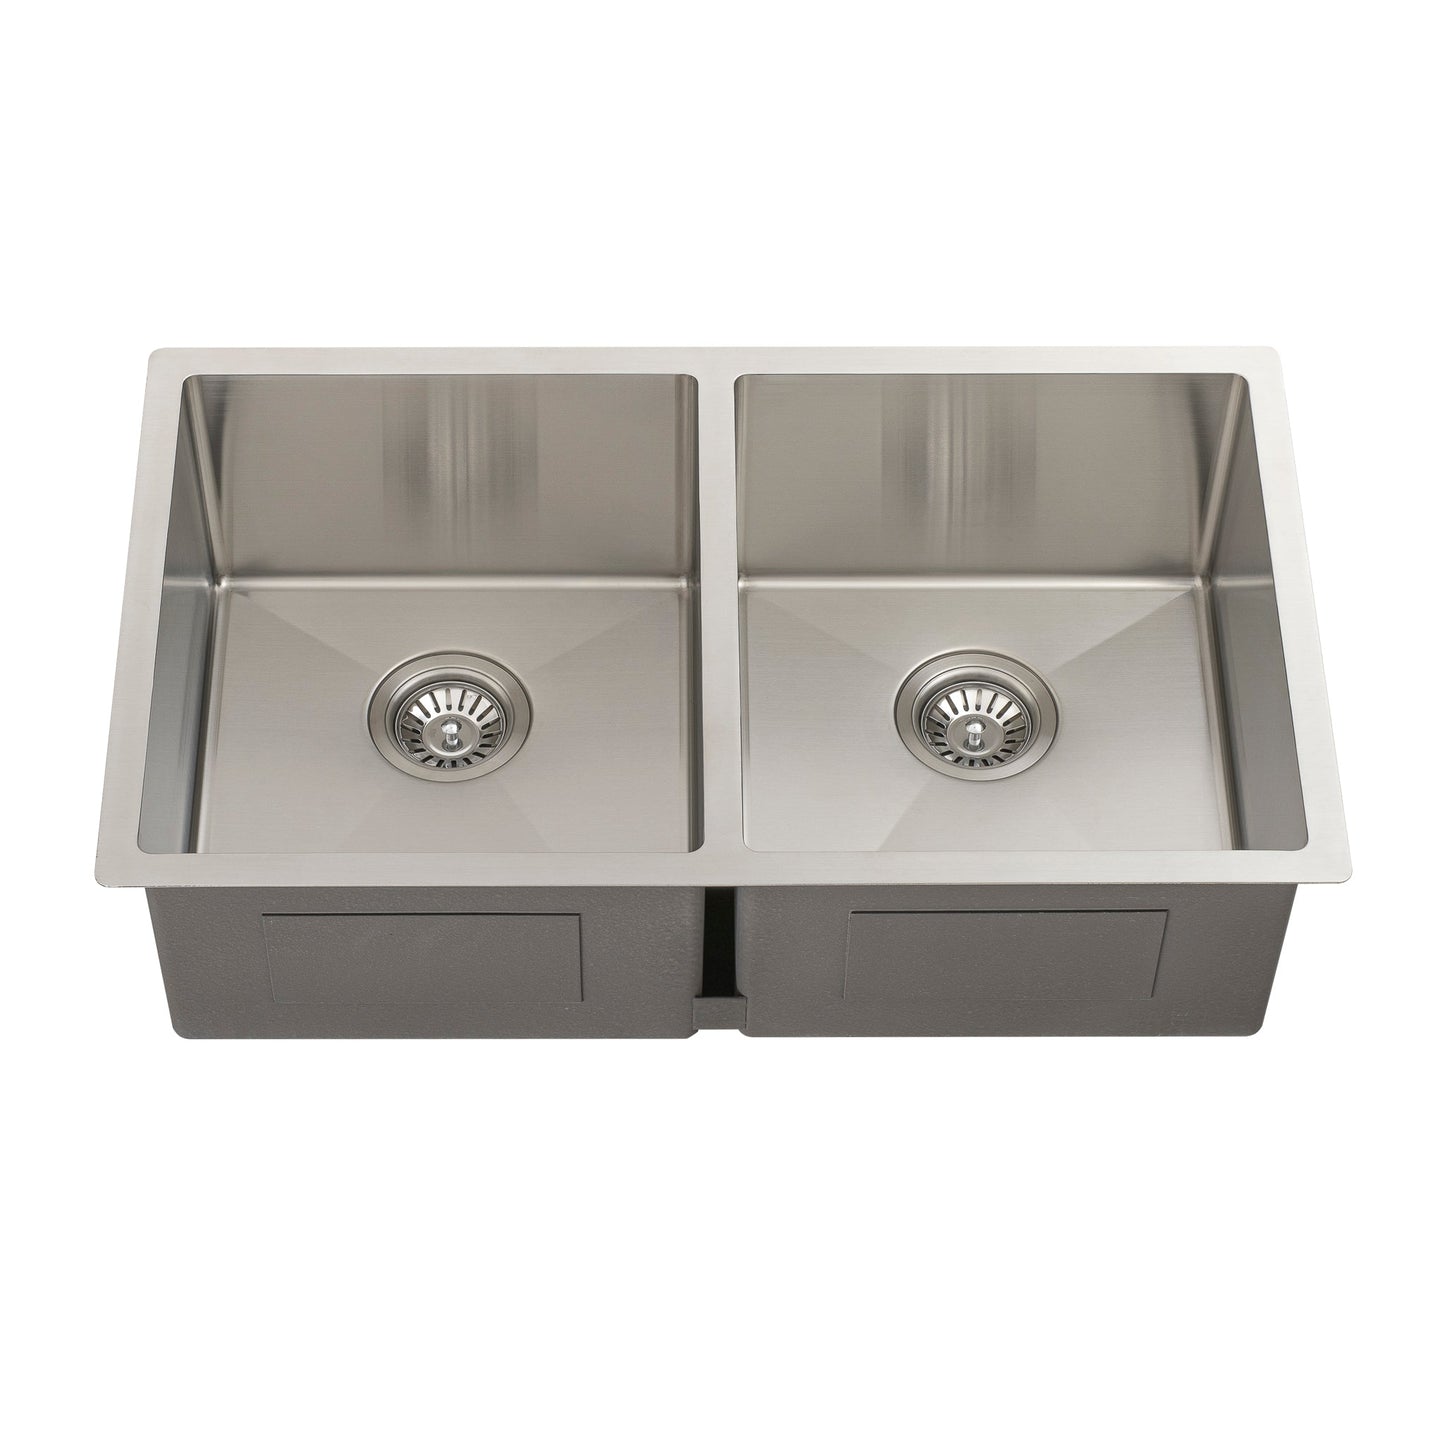 Retto II 775mm x 450mm x 230mm Stainless Steel Double Sink, Brushed Nickel Silver